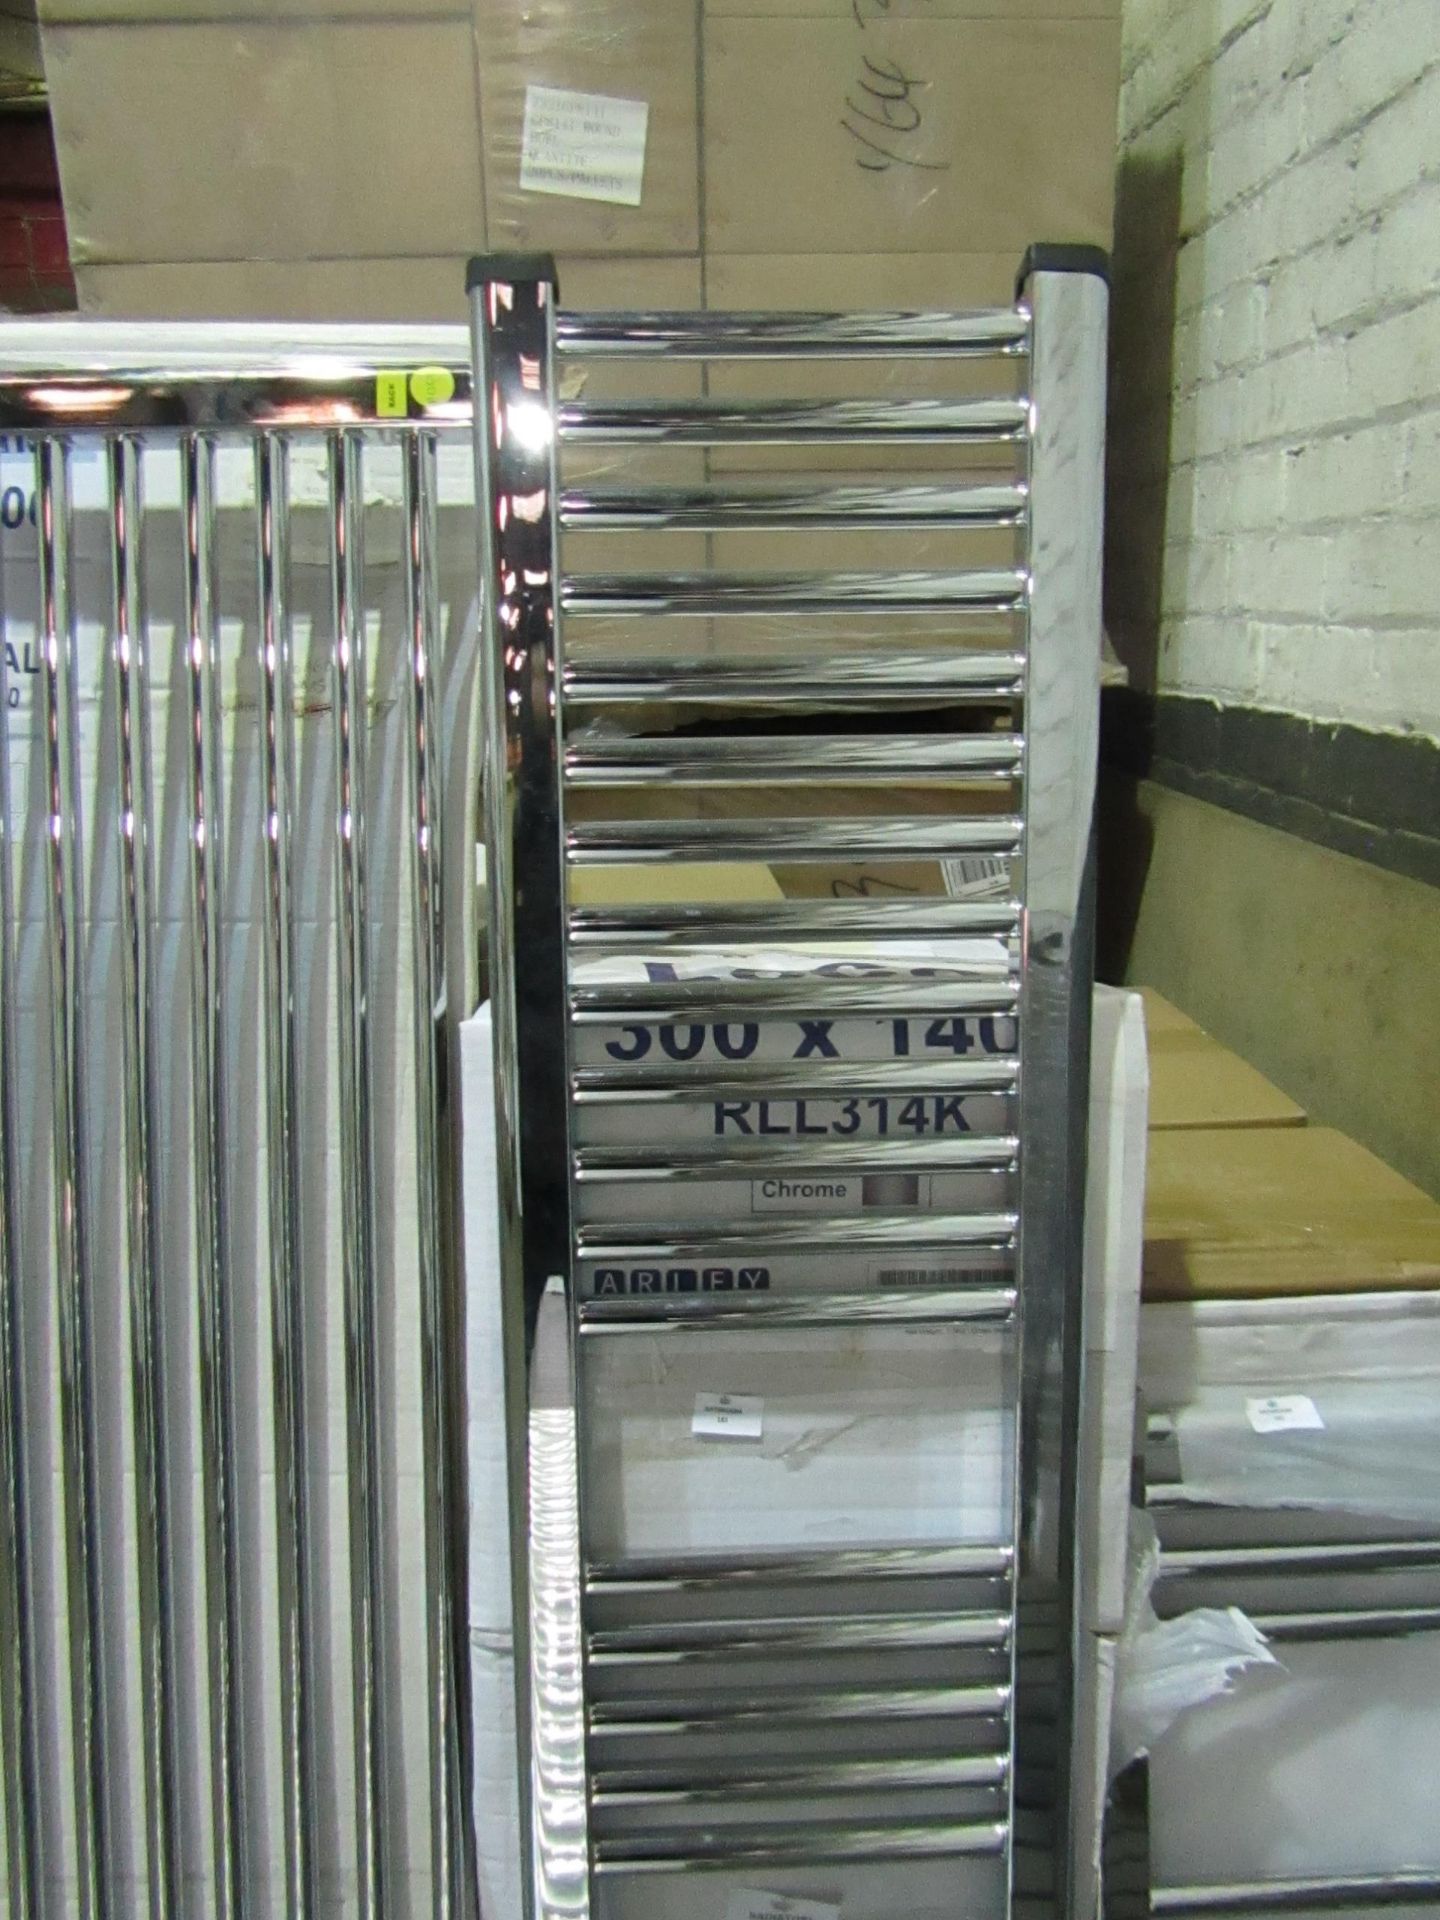 ArleyPro - Loco Straight Chrome Towel Rail - 300x1400 - No Visible Damaged. Viewing Recommended.